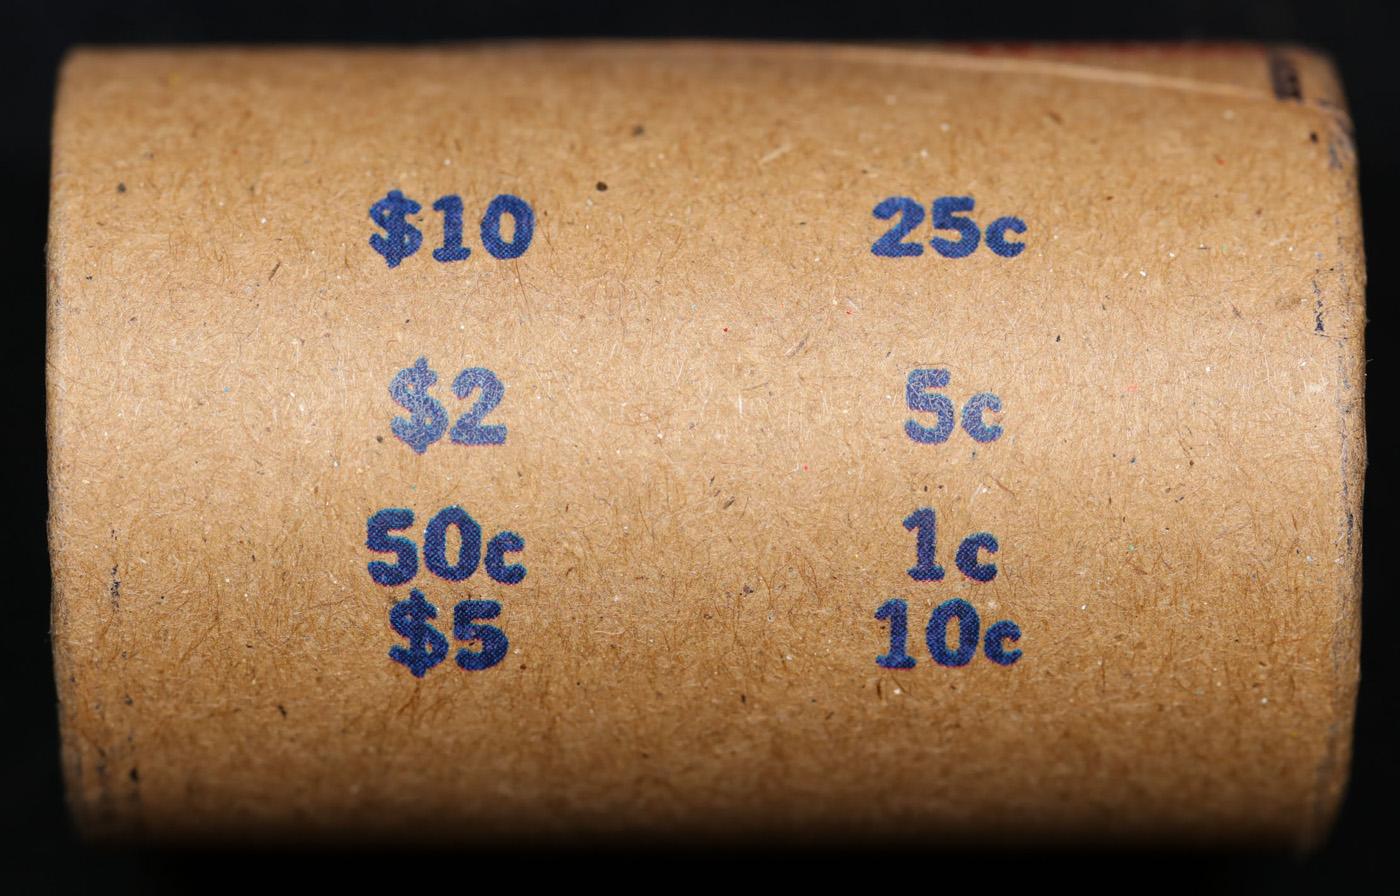 High Value! - Covered End Roll - Marked "Unc Morgan Reserve" - Weight shows x20 Coins (FC)